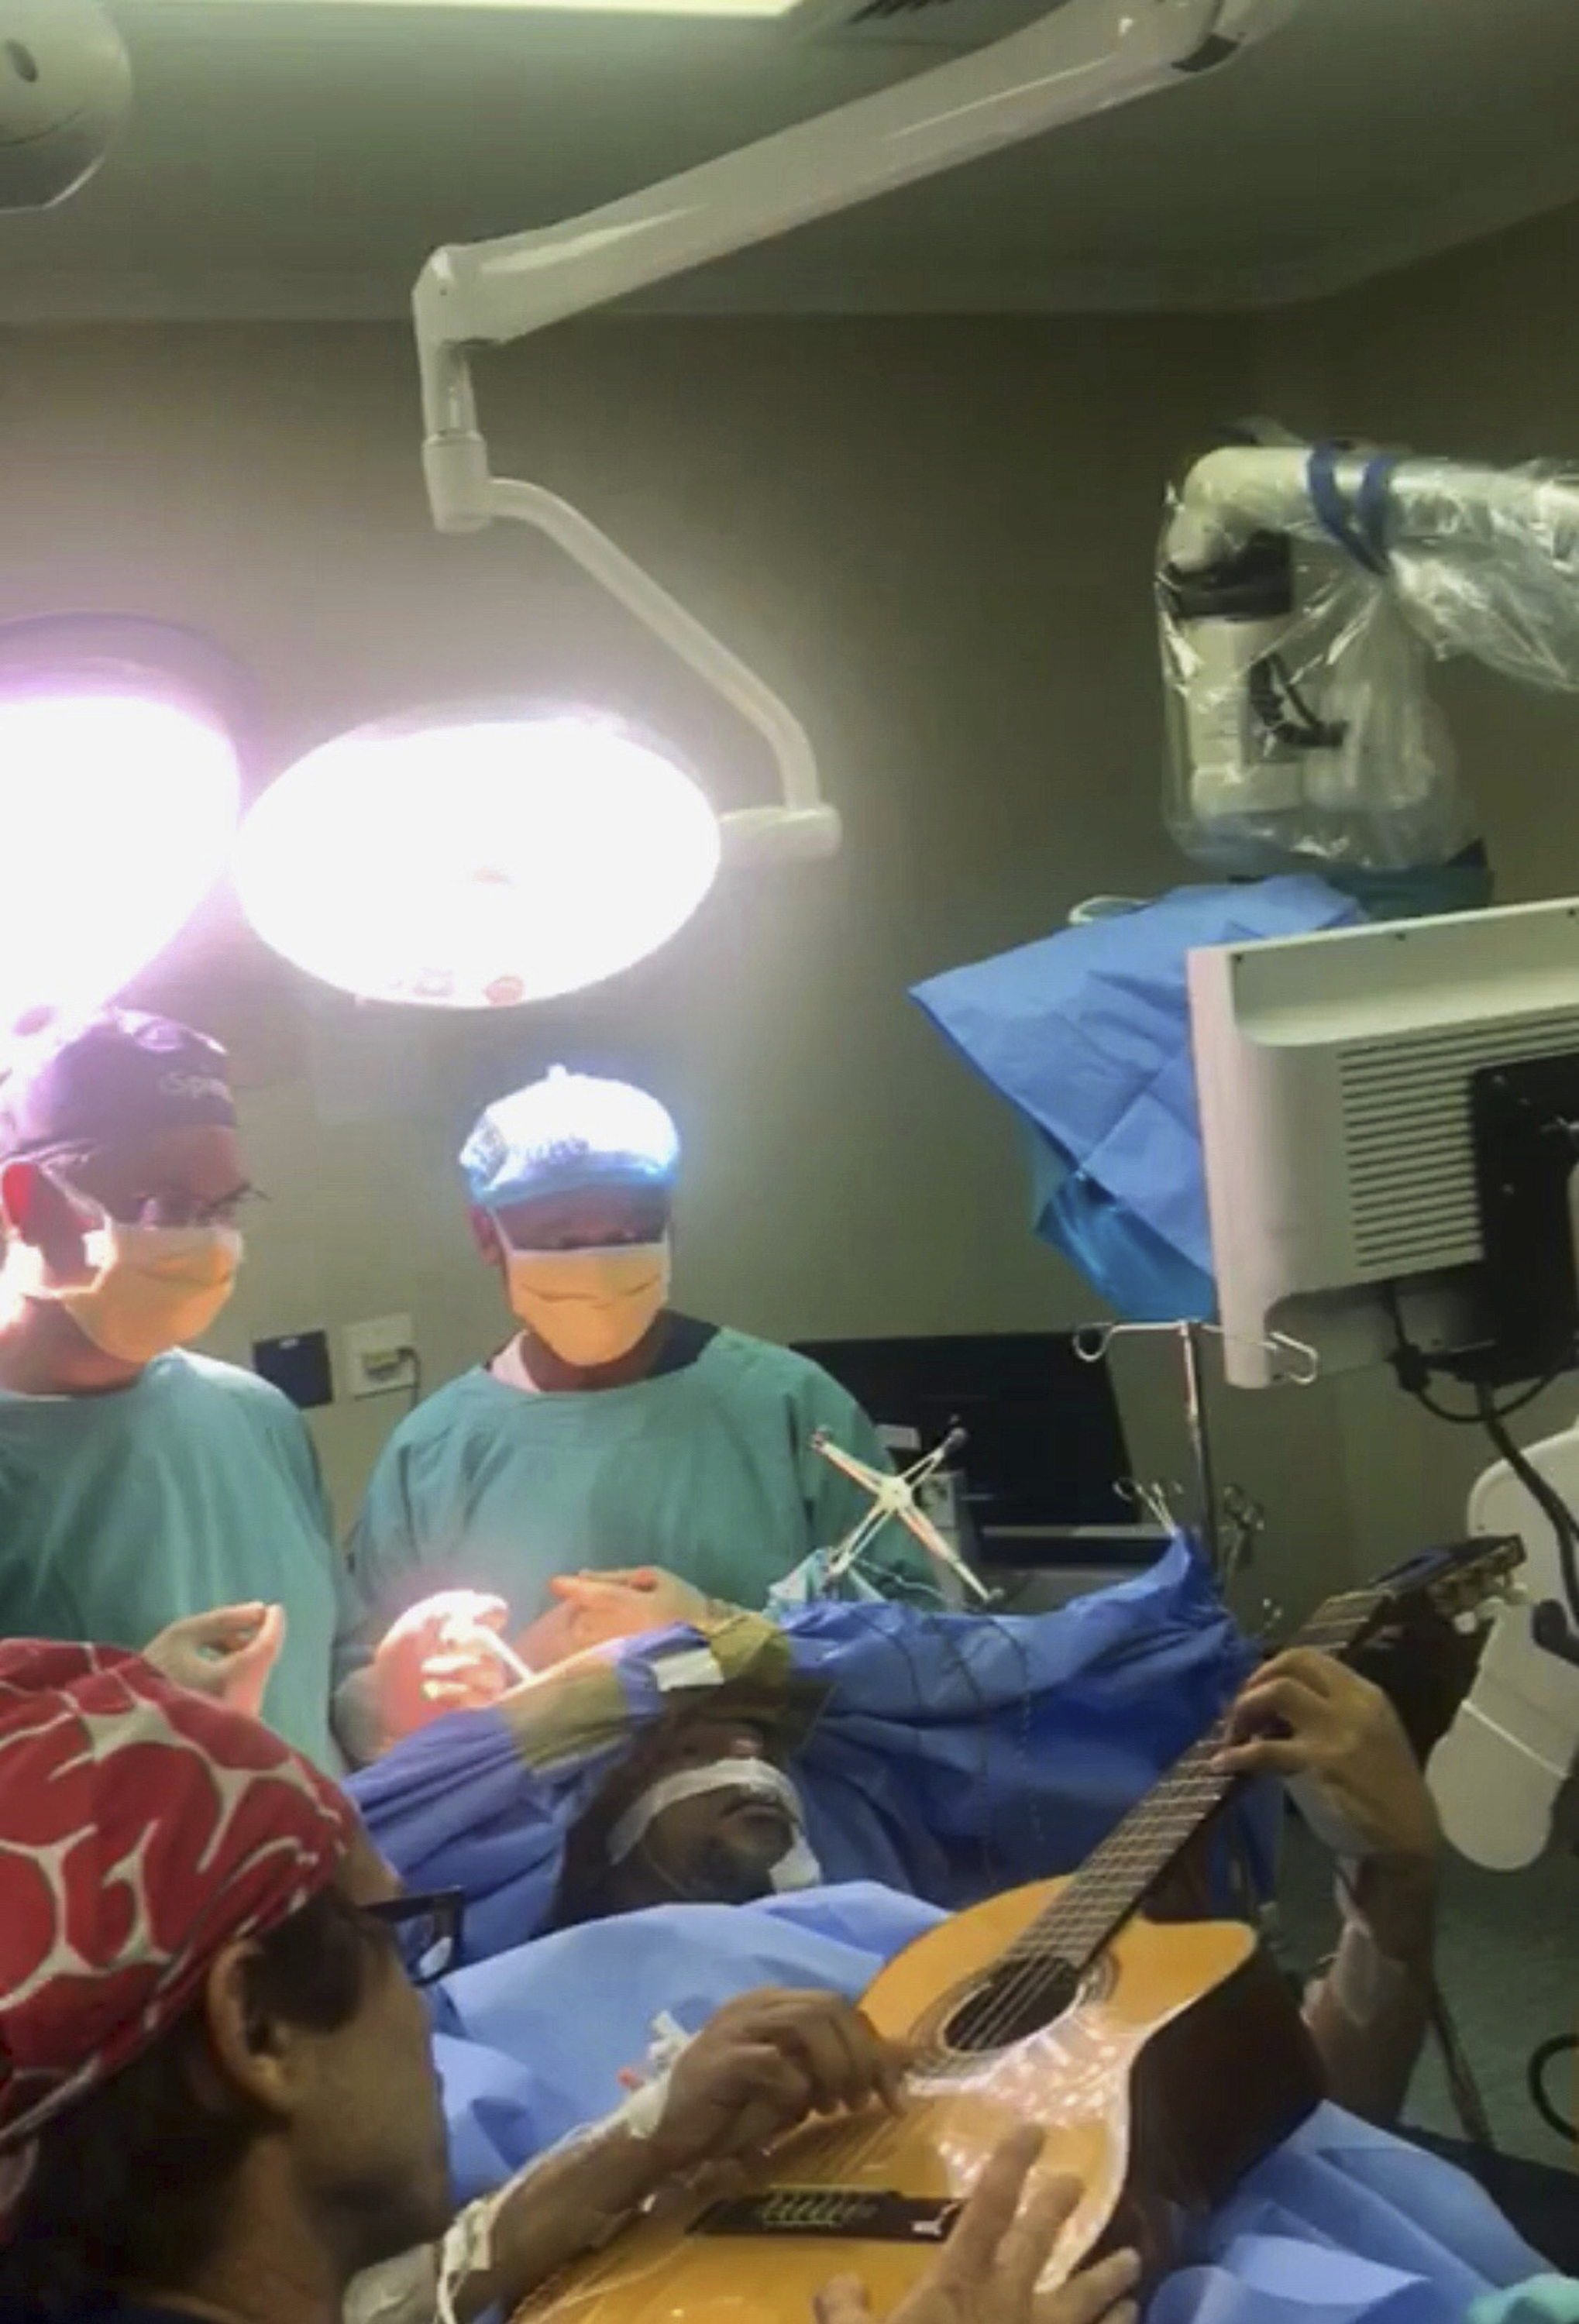 South African musician plays guitar during brain surgery